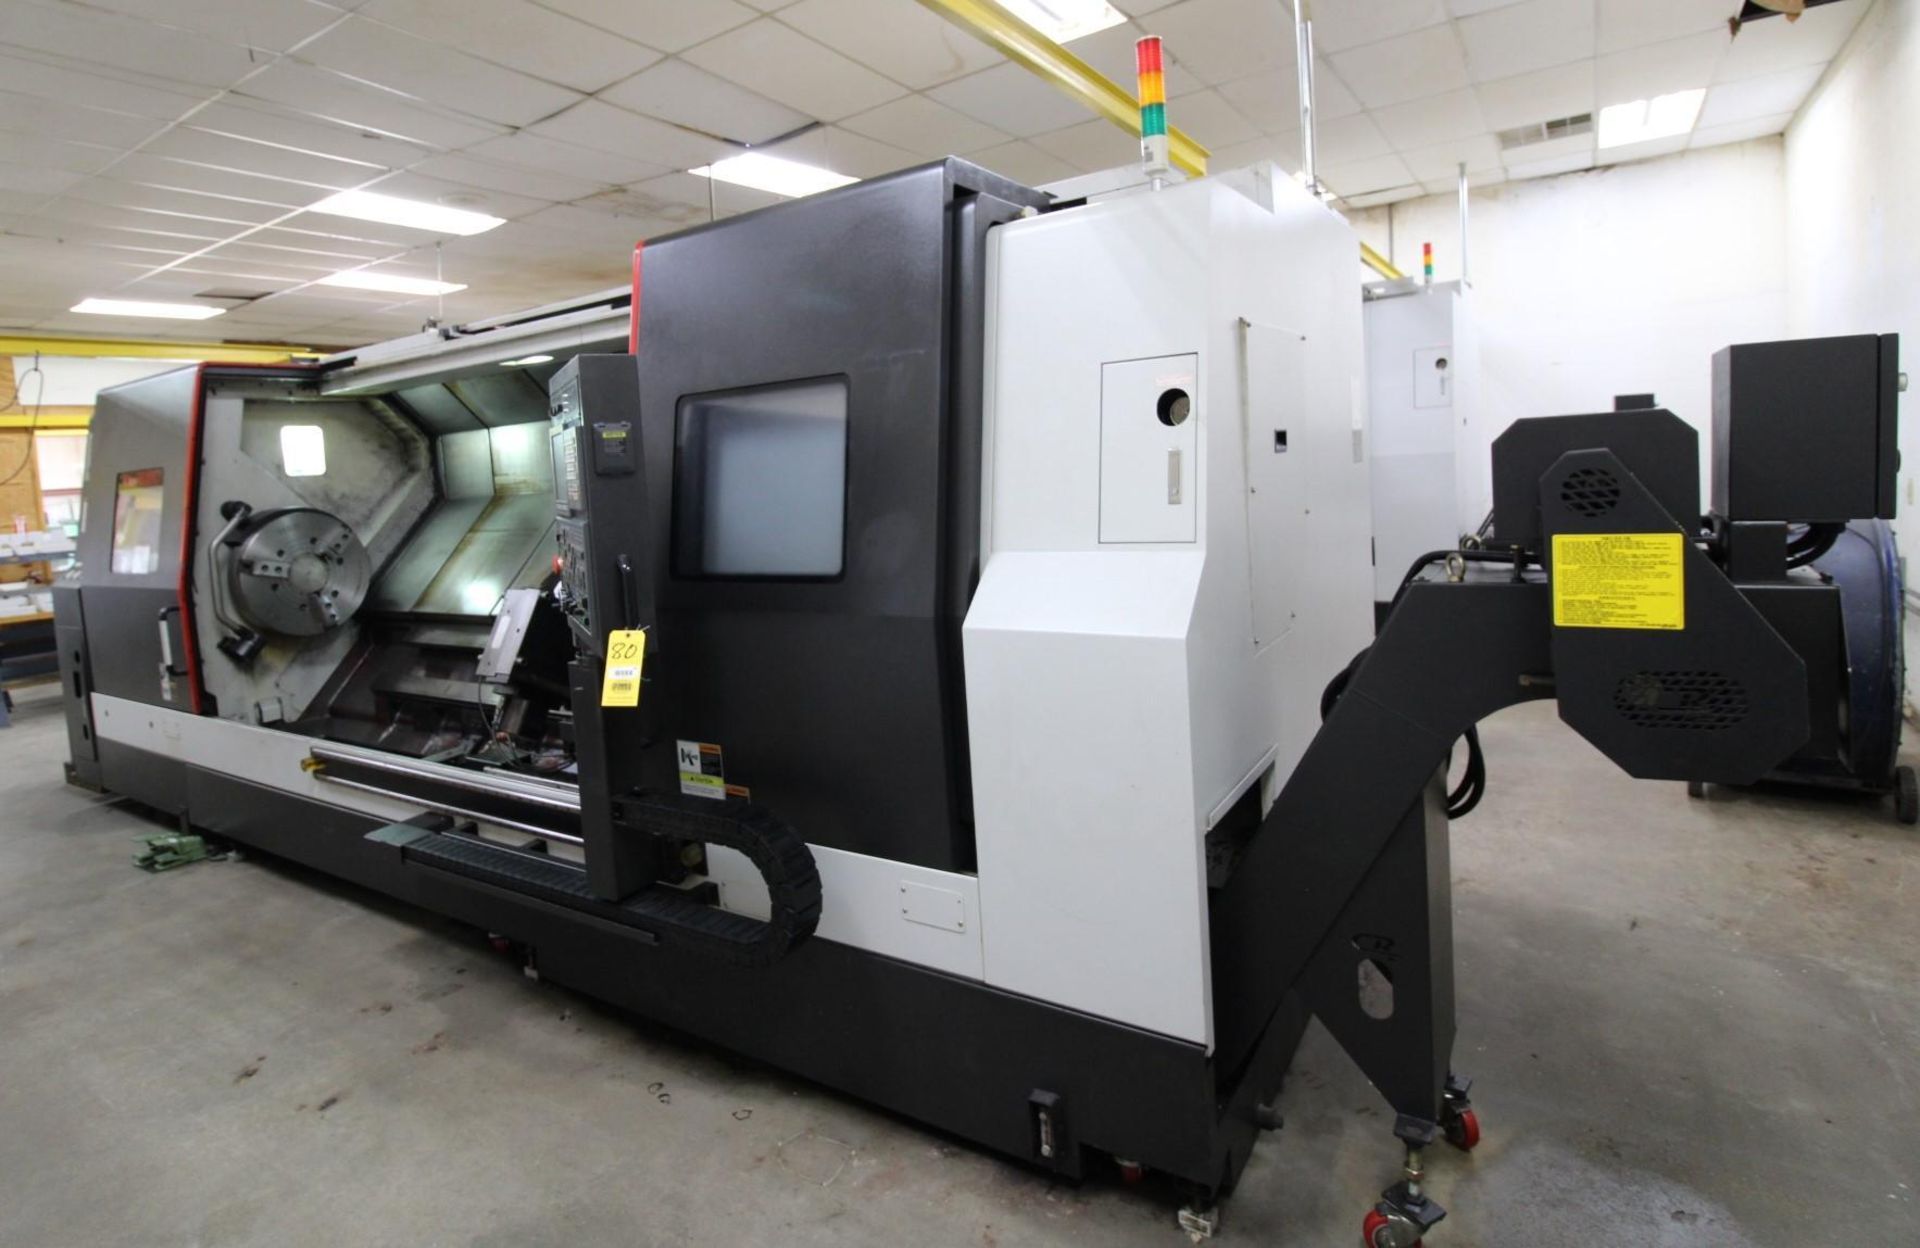 MULTI AXIS CNC MILLING & TURNING CENTER, SAMSUNG MDL. SL-45MC/3000, new 2014, Fanuc Oi-TD control, - Image 3 of 16